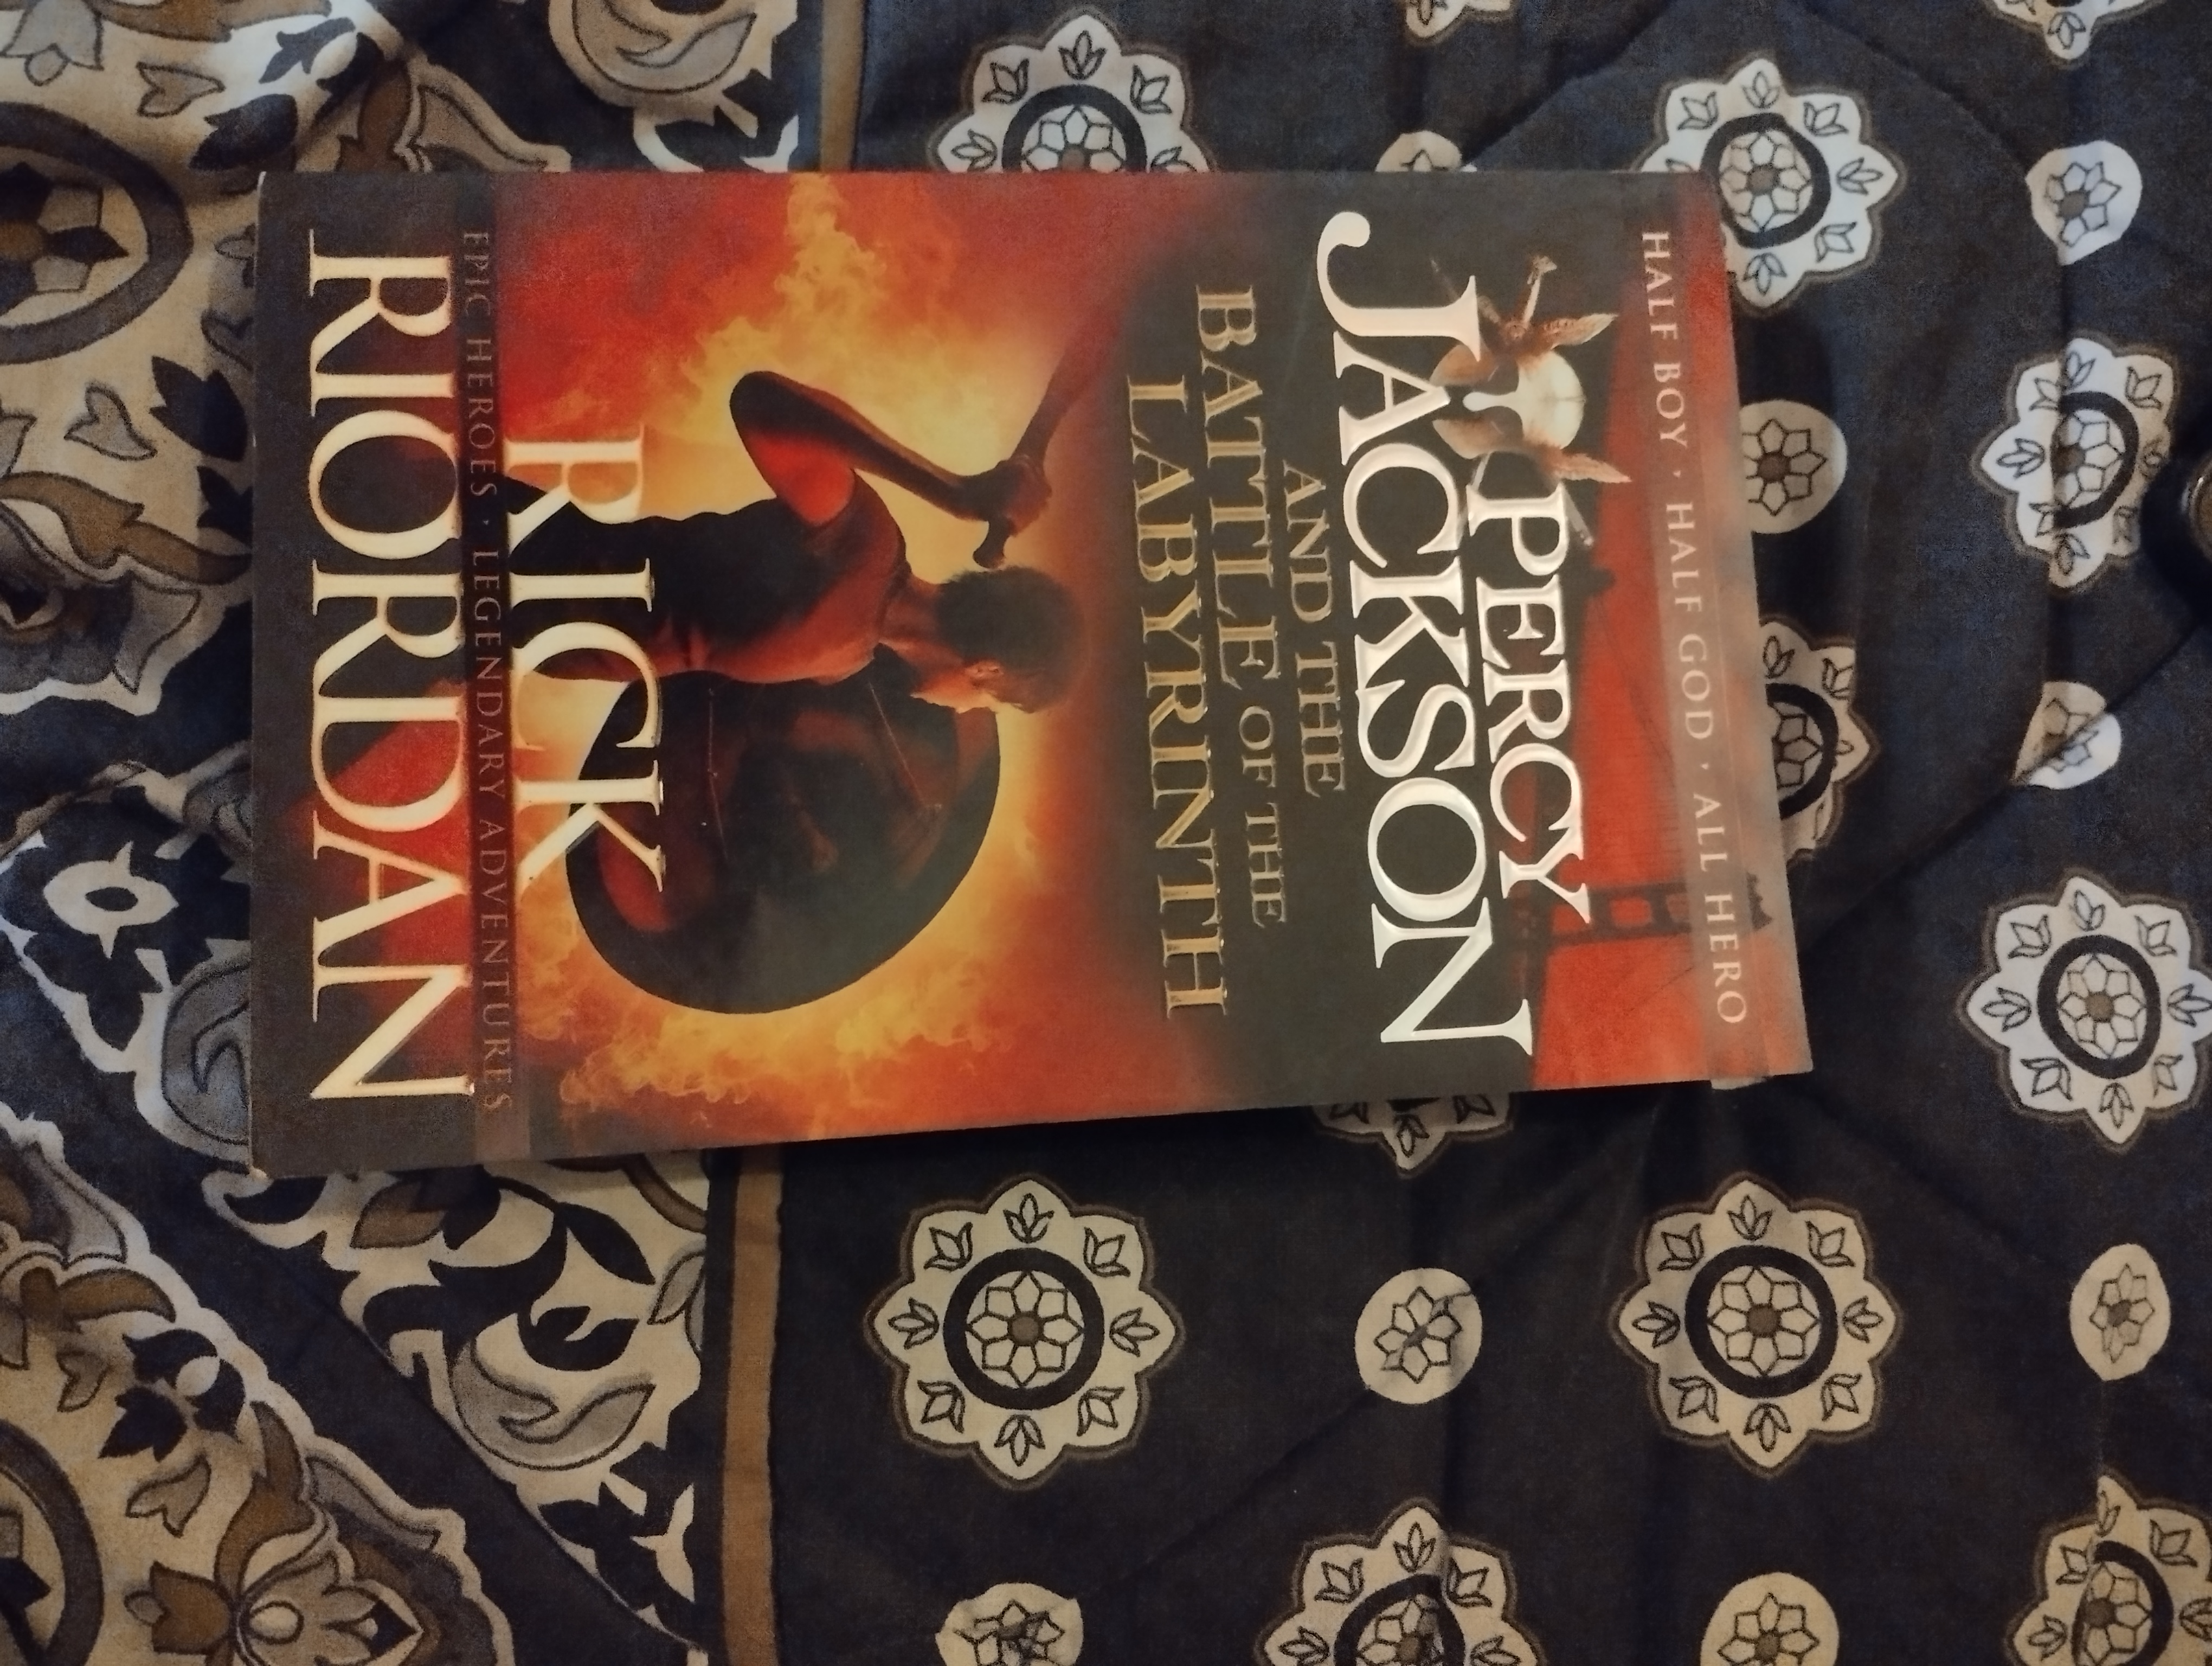 Percy Jackson and The Olympians – The complete set